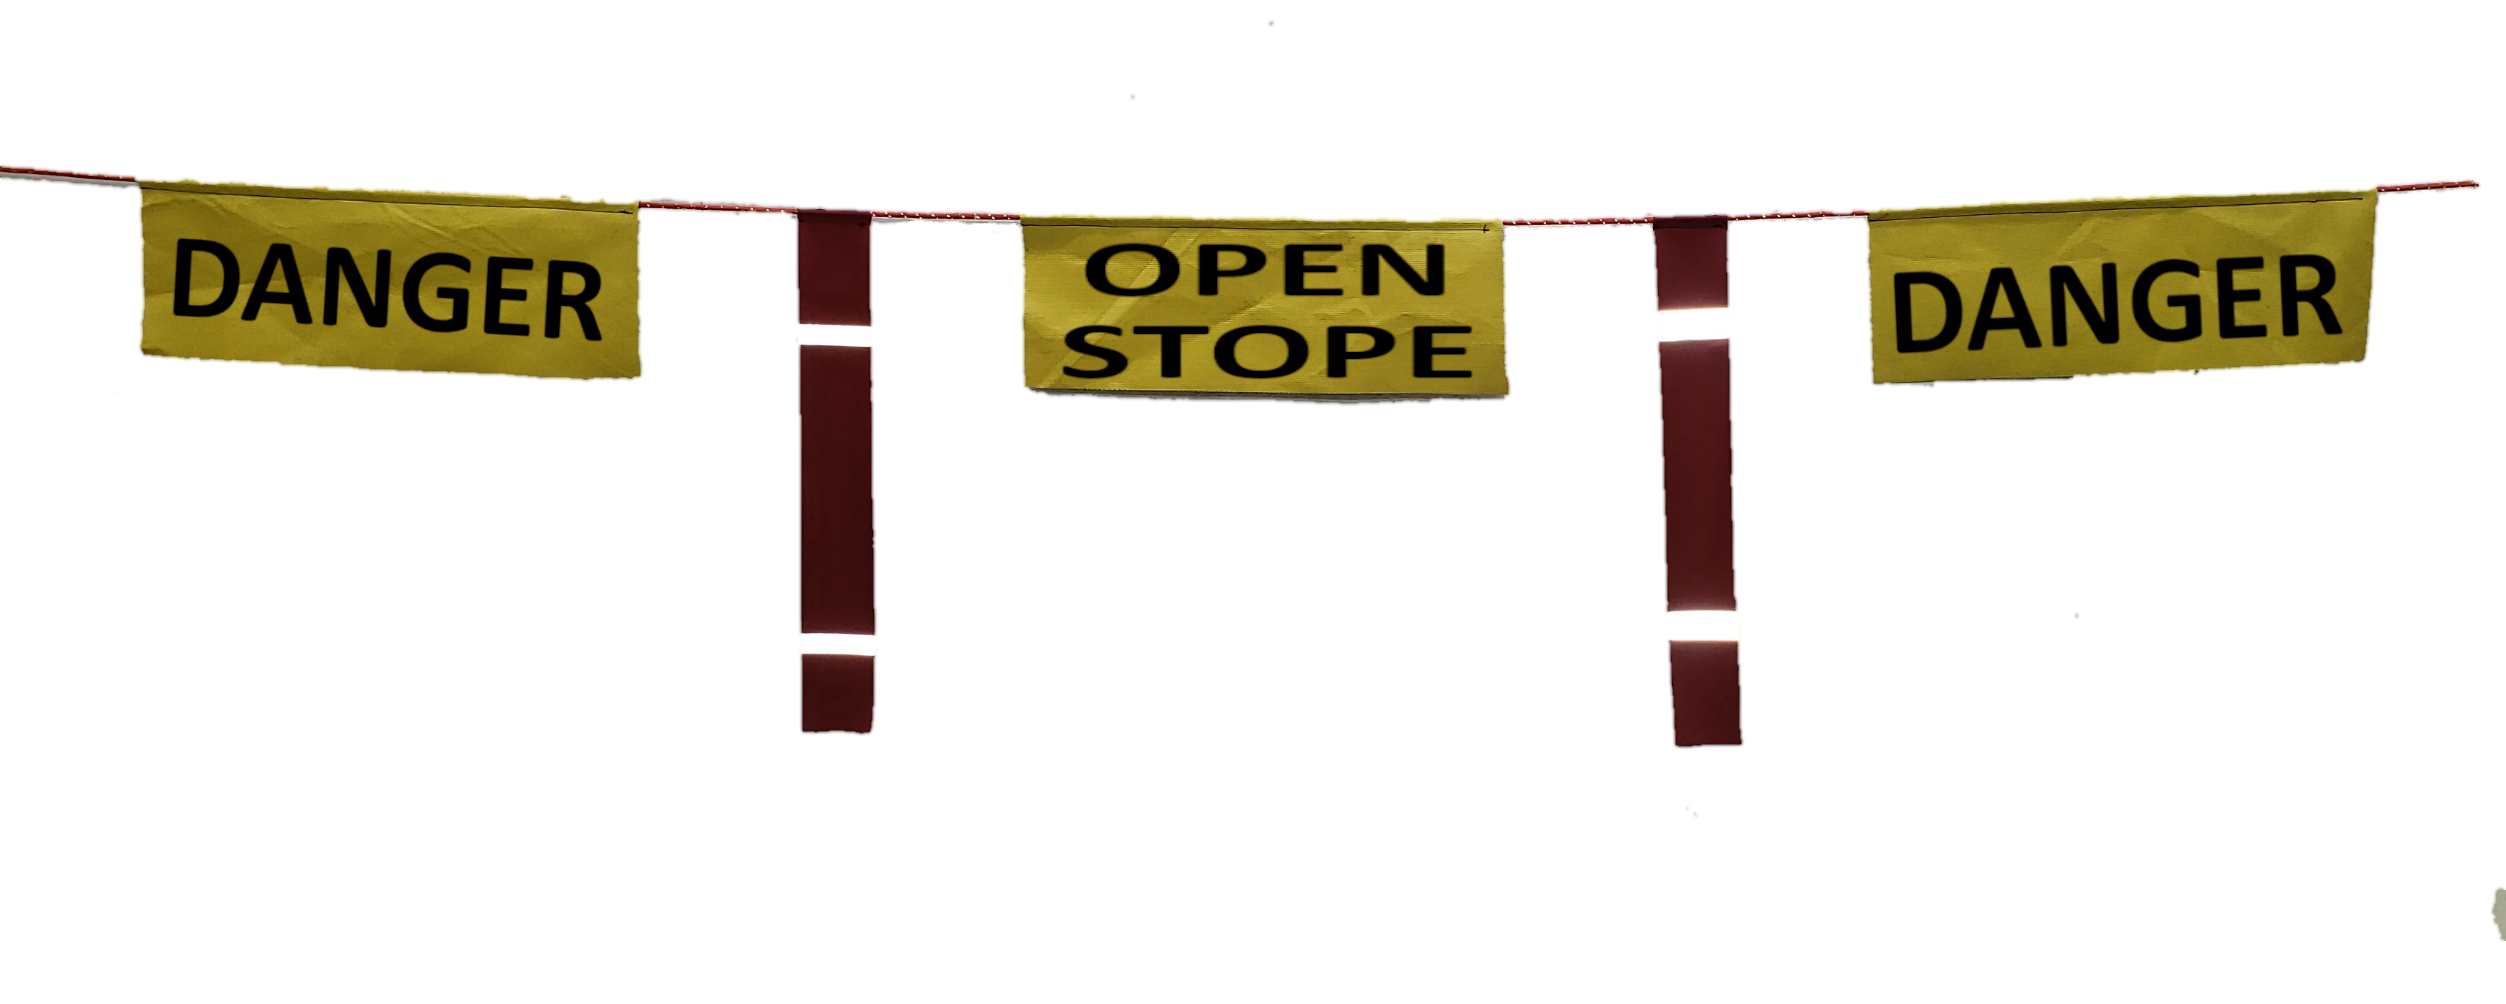 OPEN STOPE BARRICADE